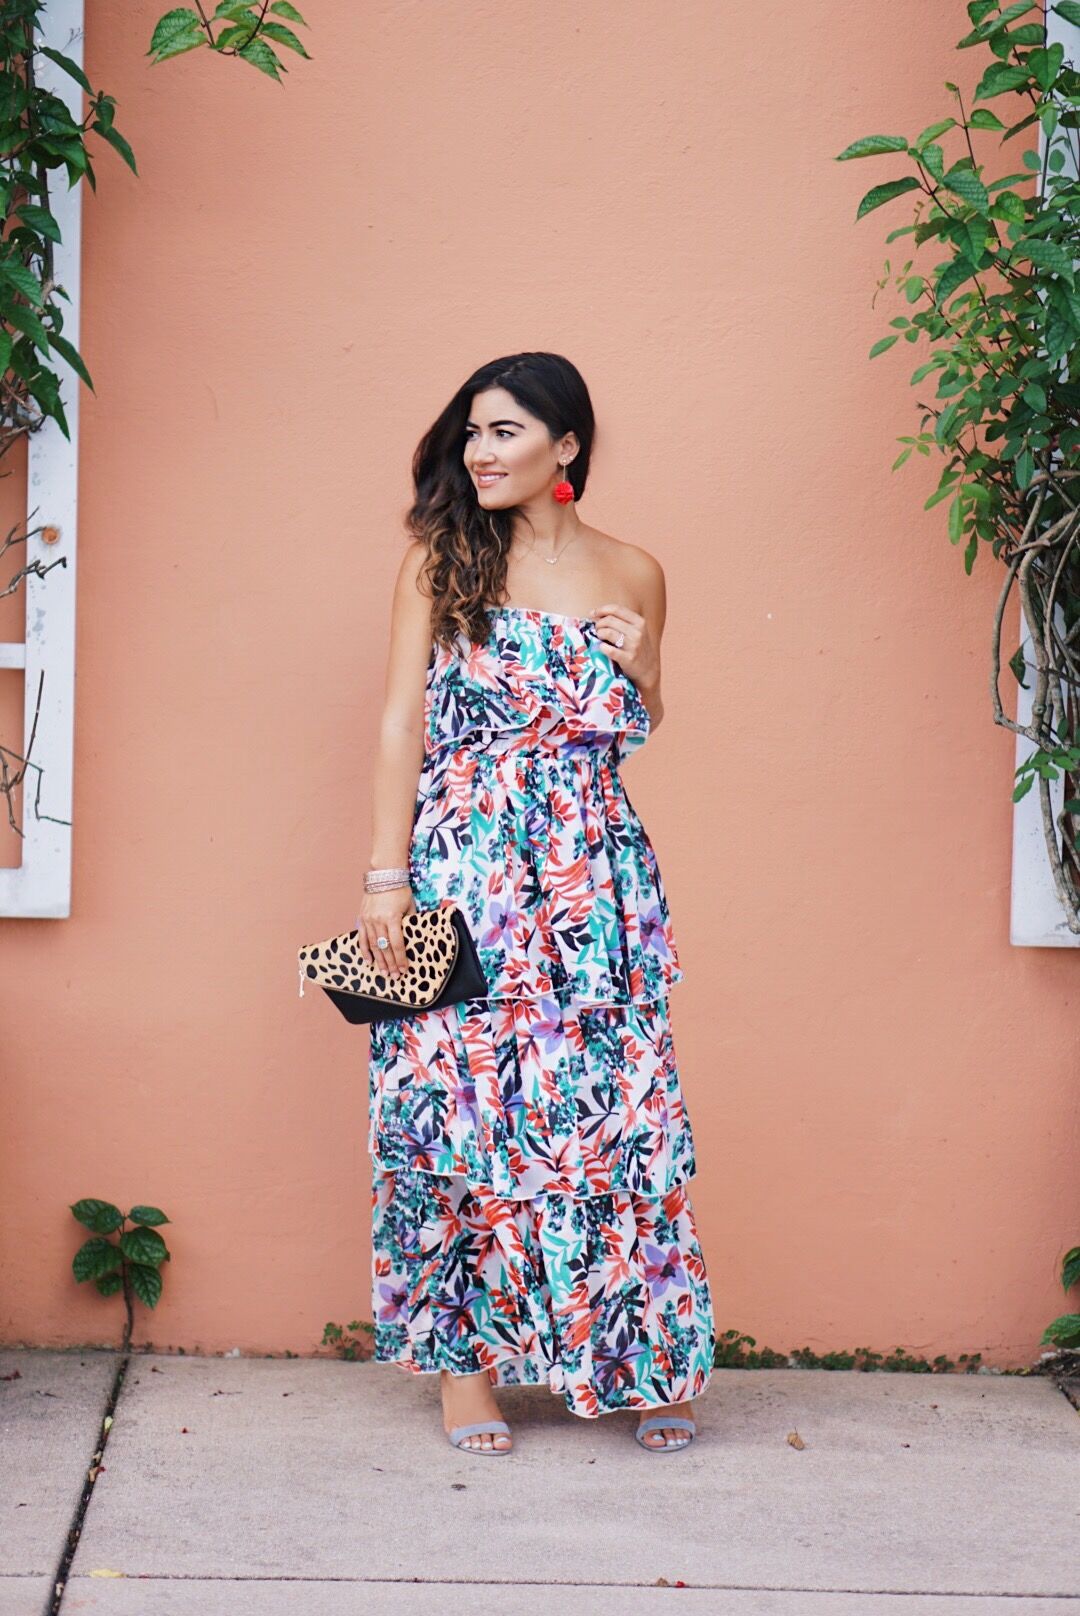 Event Dresses Under $50: Affordable Cocktail, Maxi and Midi Dresses ...